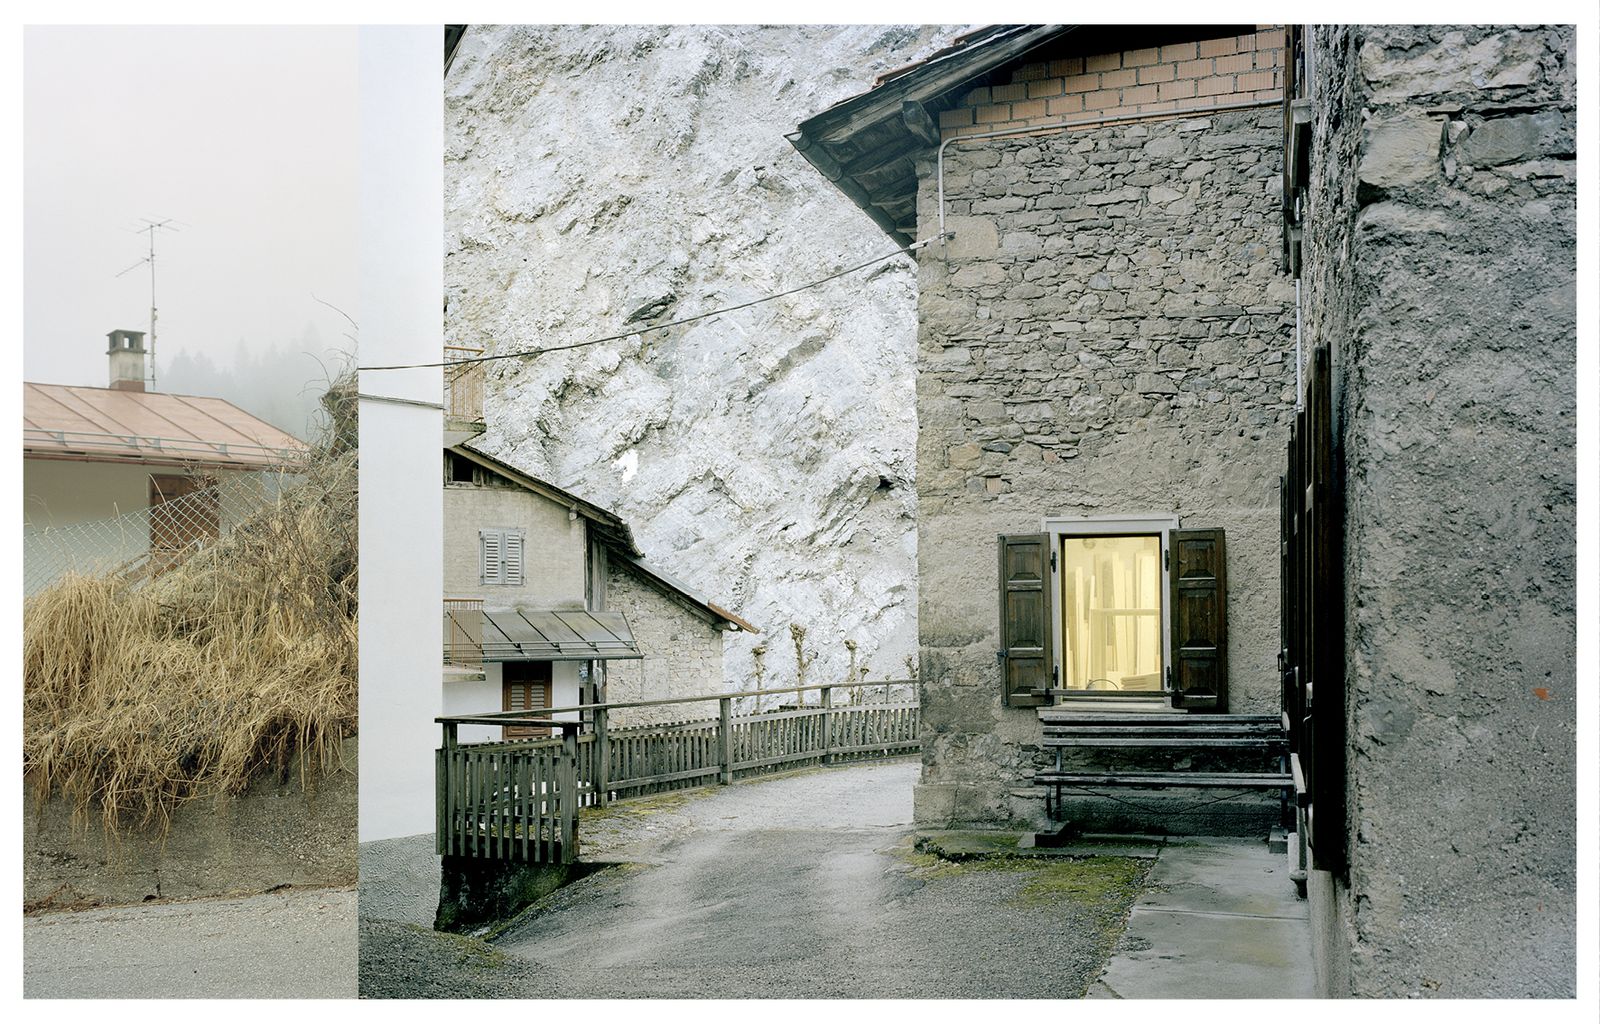 © Marina Caneve - ‘Are They Rocks or Clouds?’ book spread, Fw:Books and OTM 2019, Destruction-Experience